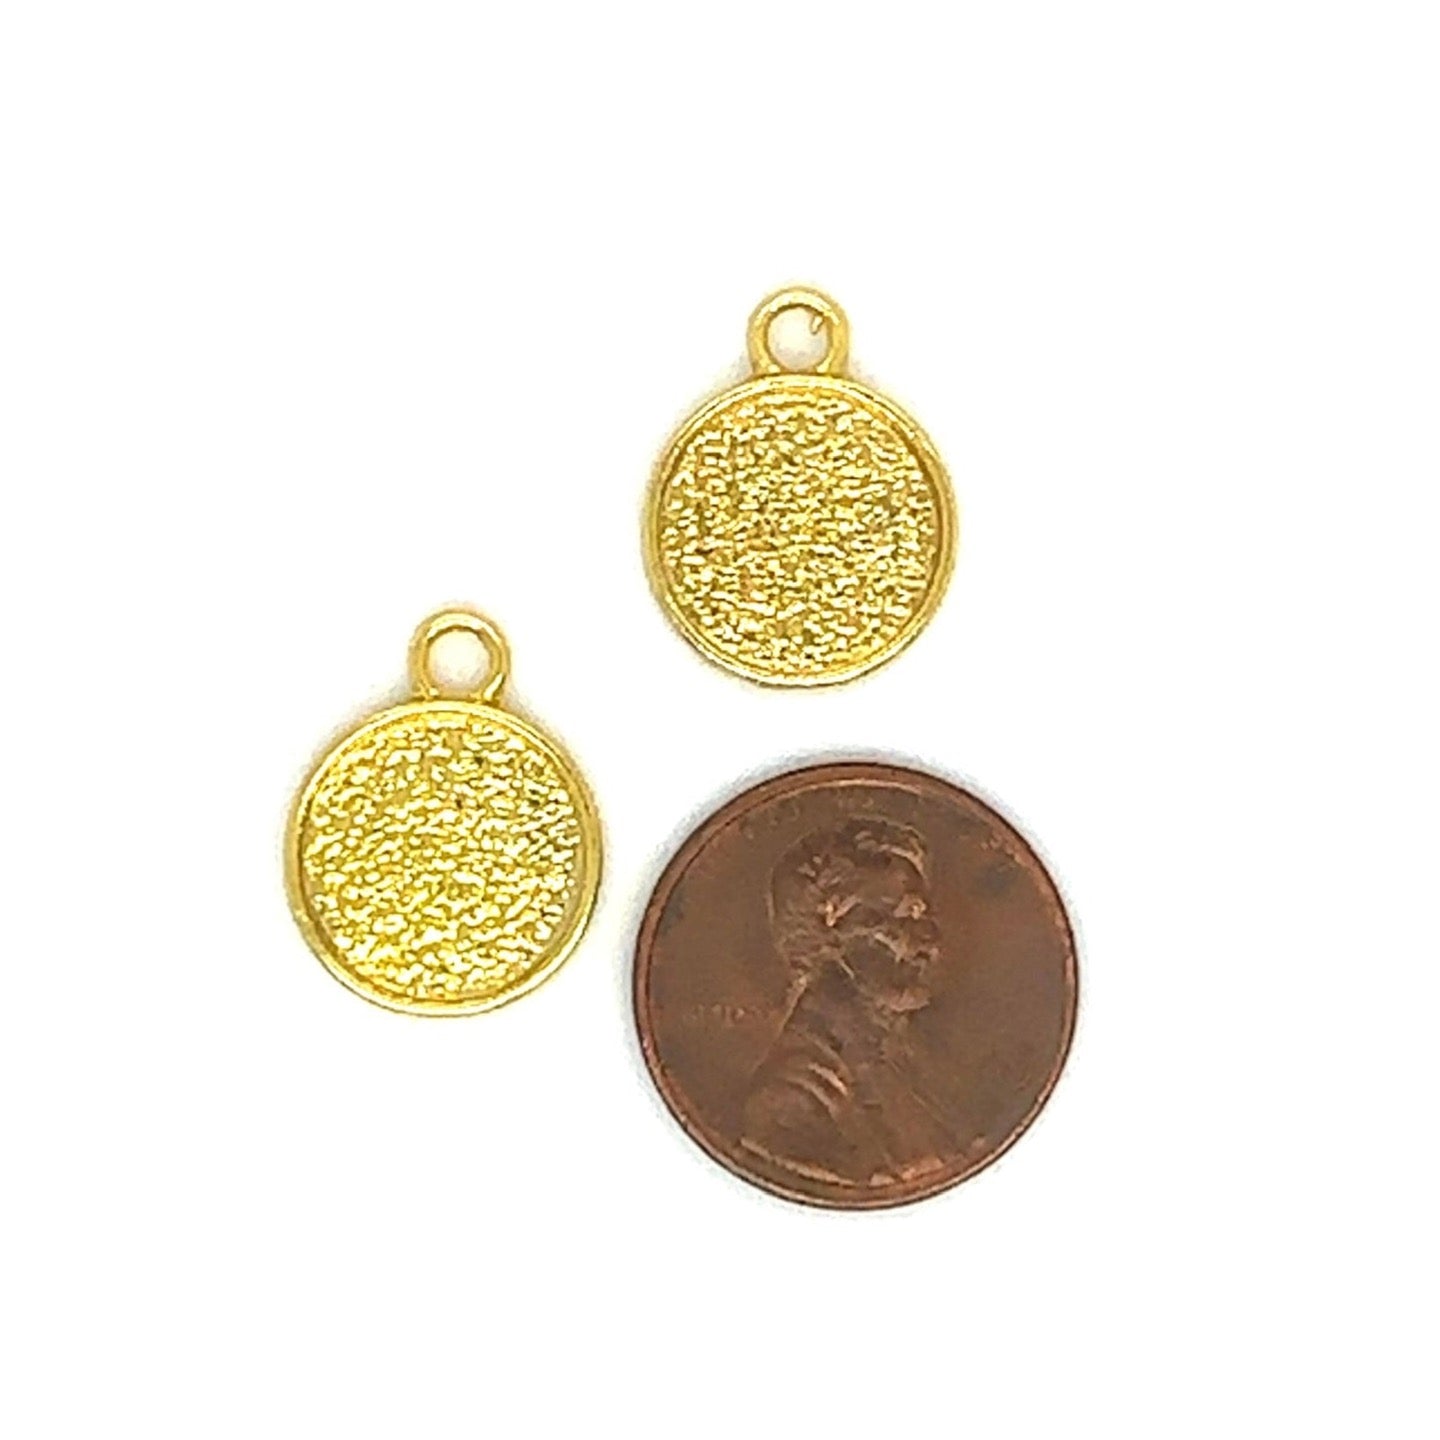 12mm small round jewelry making supplies charm gold